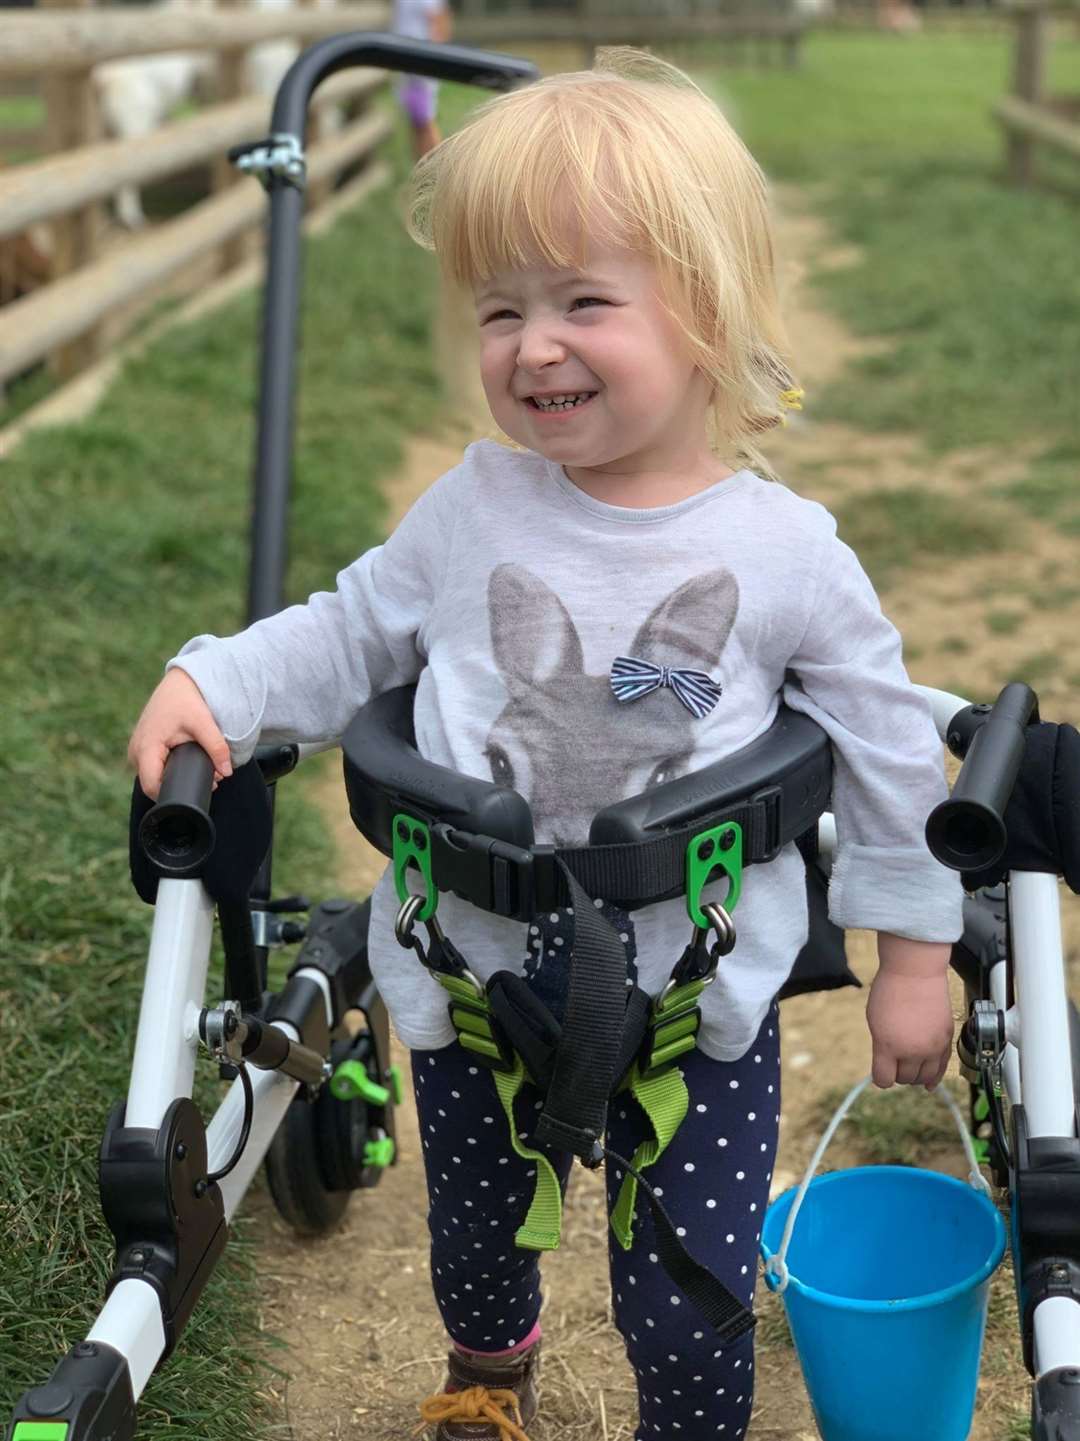 Willow, 2, suffers from spina bifida and requires a walking frame to assist her